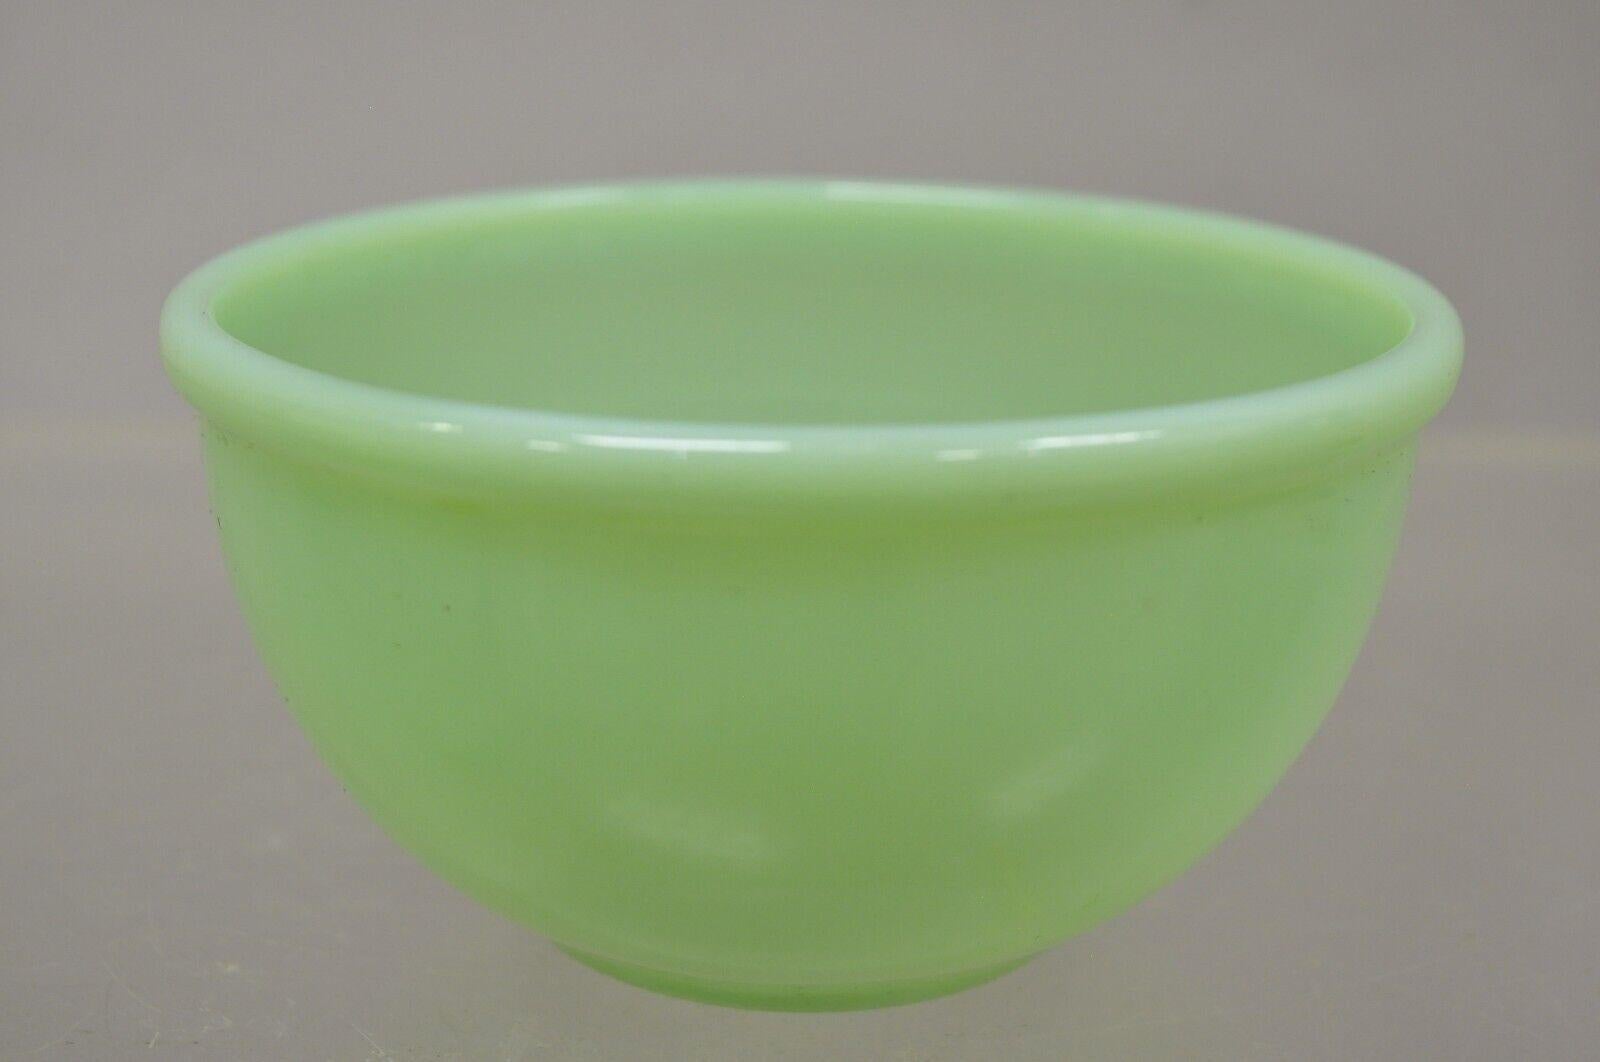 Vtg Fire King Jadeite Green 13 Oven Ware Round Cereal Chili Soup Bowl, 2 Pcs 2